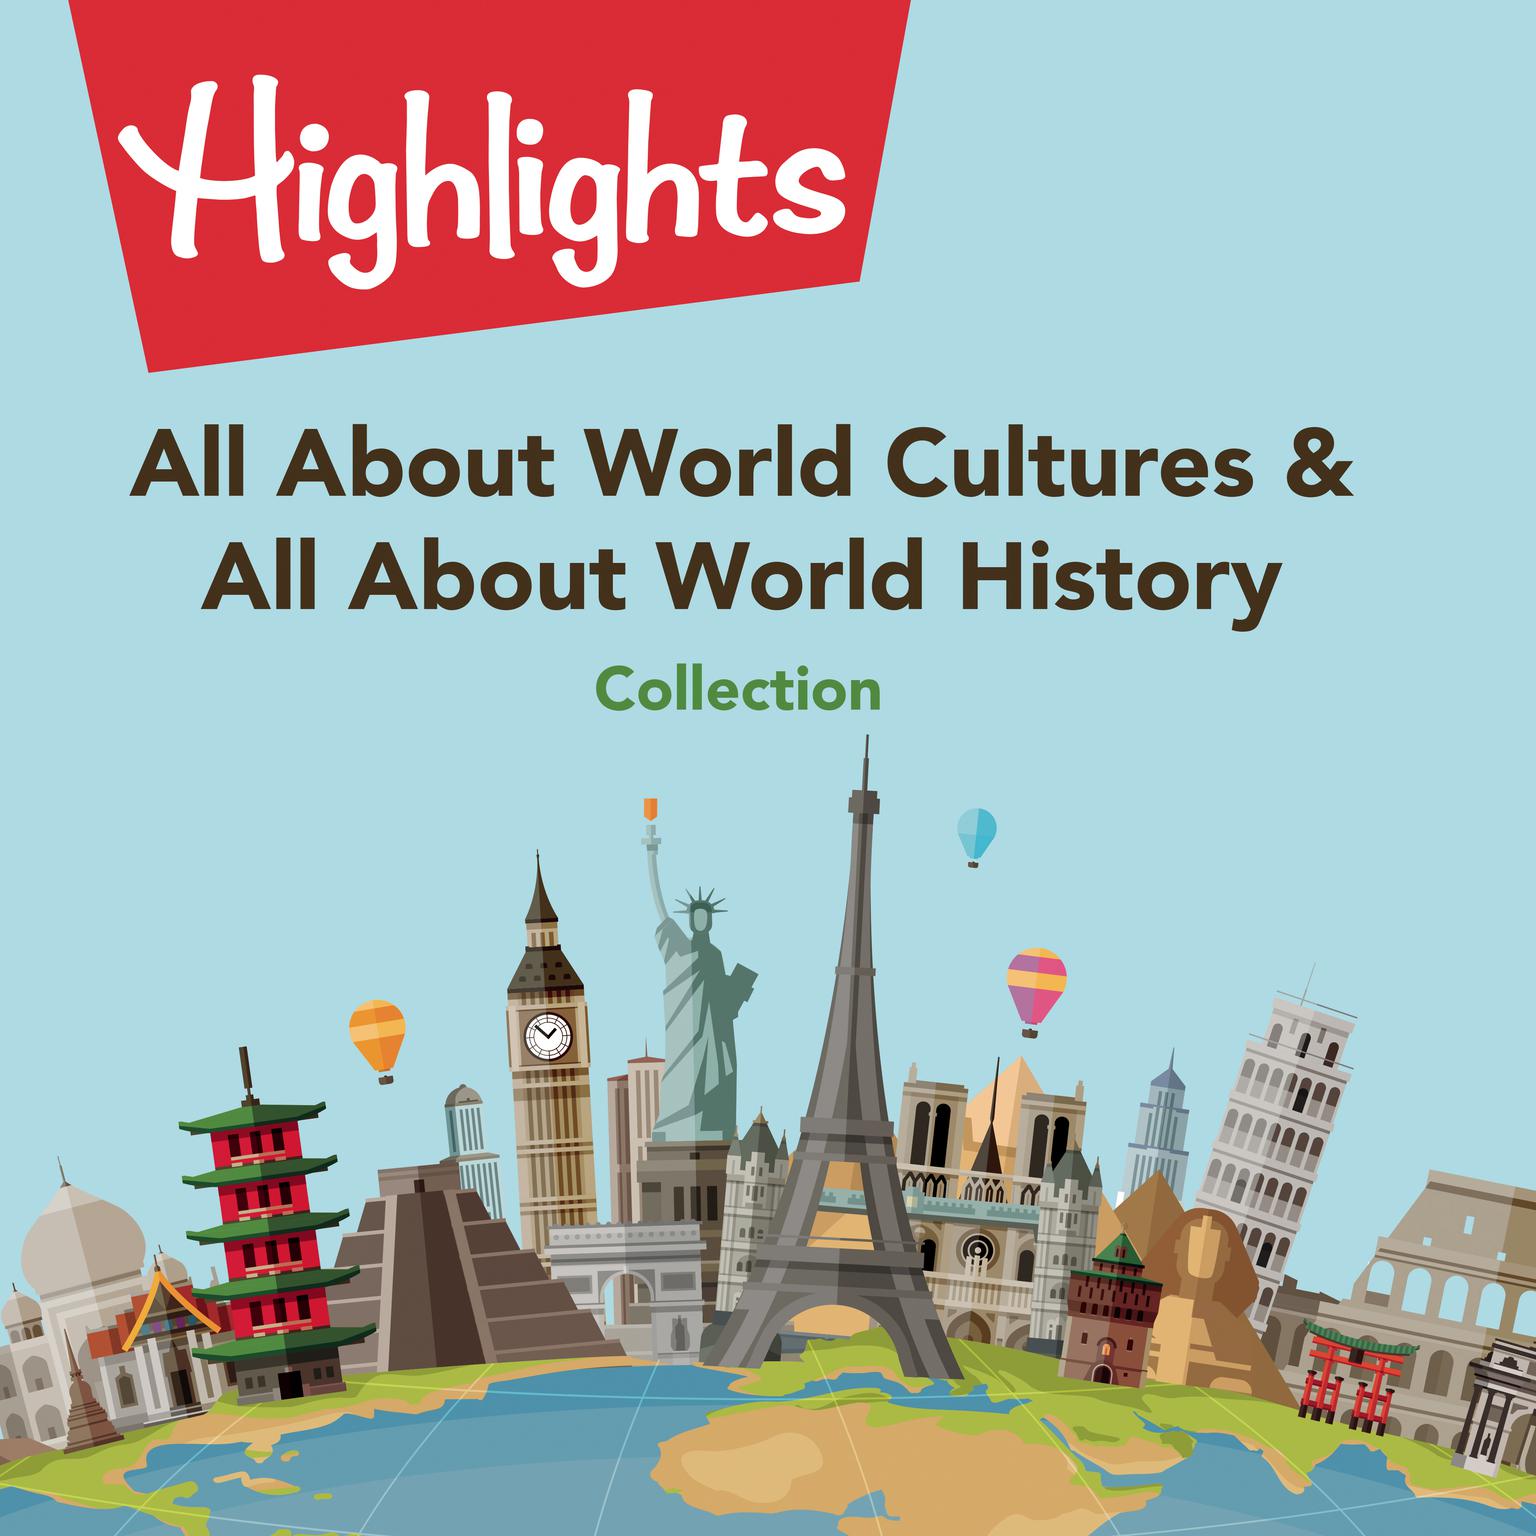 All About World Cultures & All About World History Collection Audiobook, by Valerie Houston